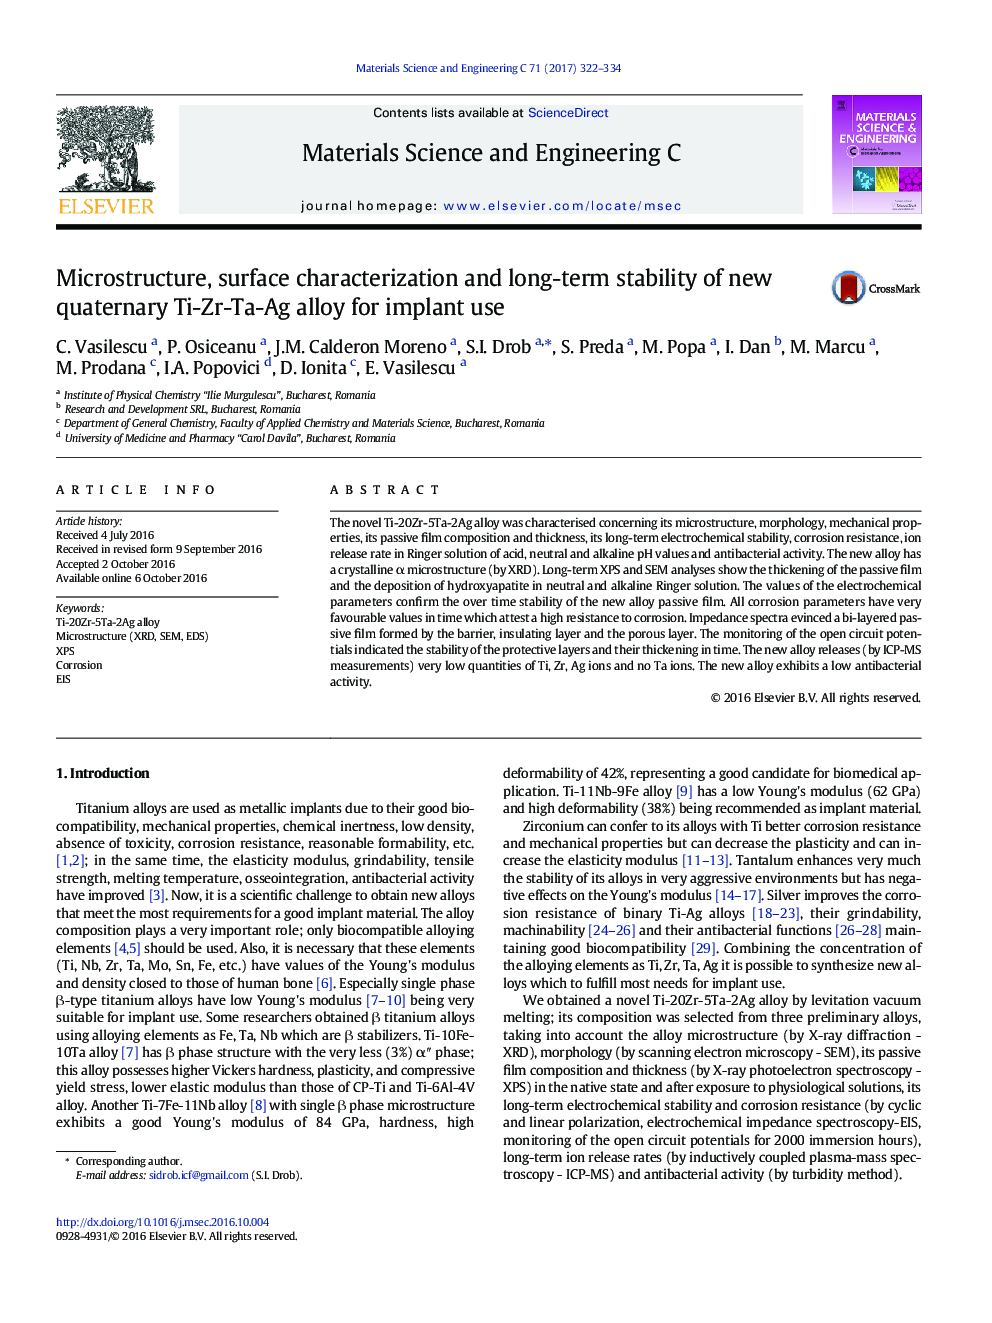 Microstructure, surface characterization and long-term stability of new quaternary Ti-Zr-Ta-Ag alloy for implant use